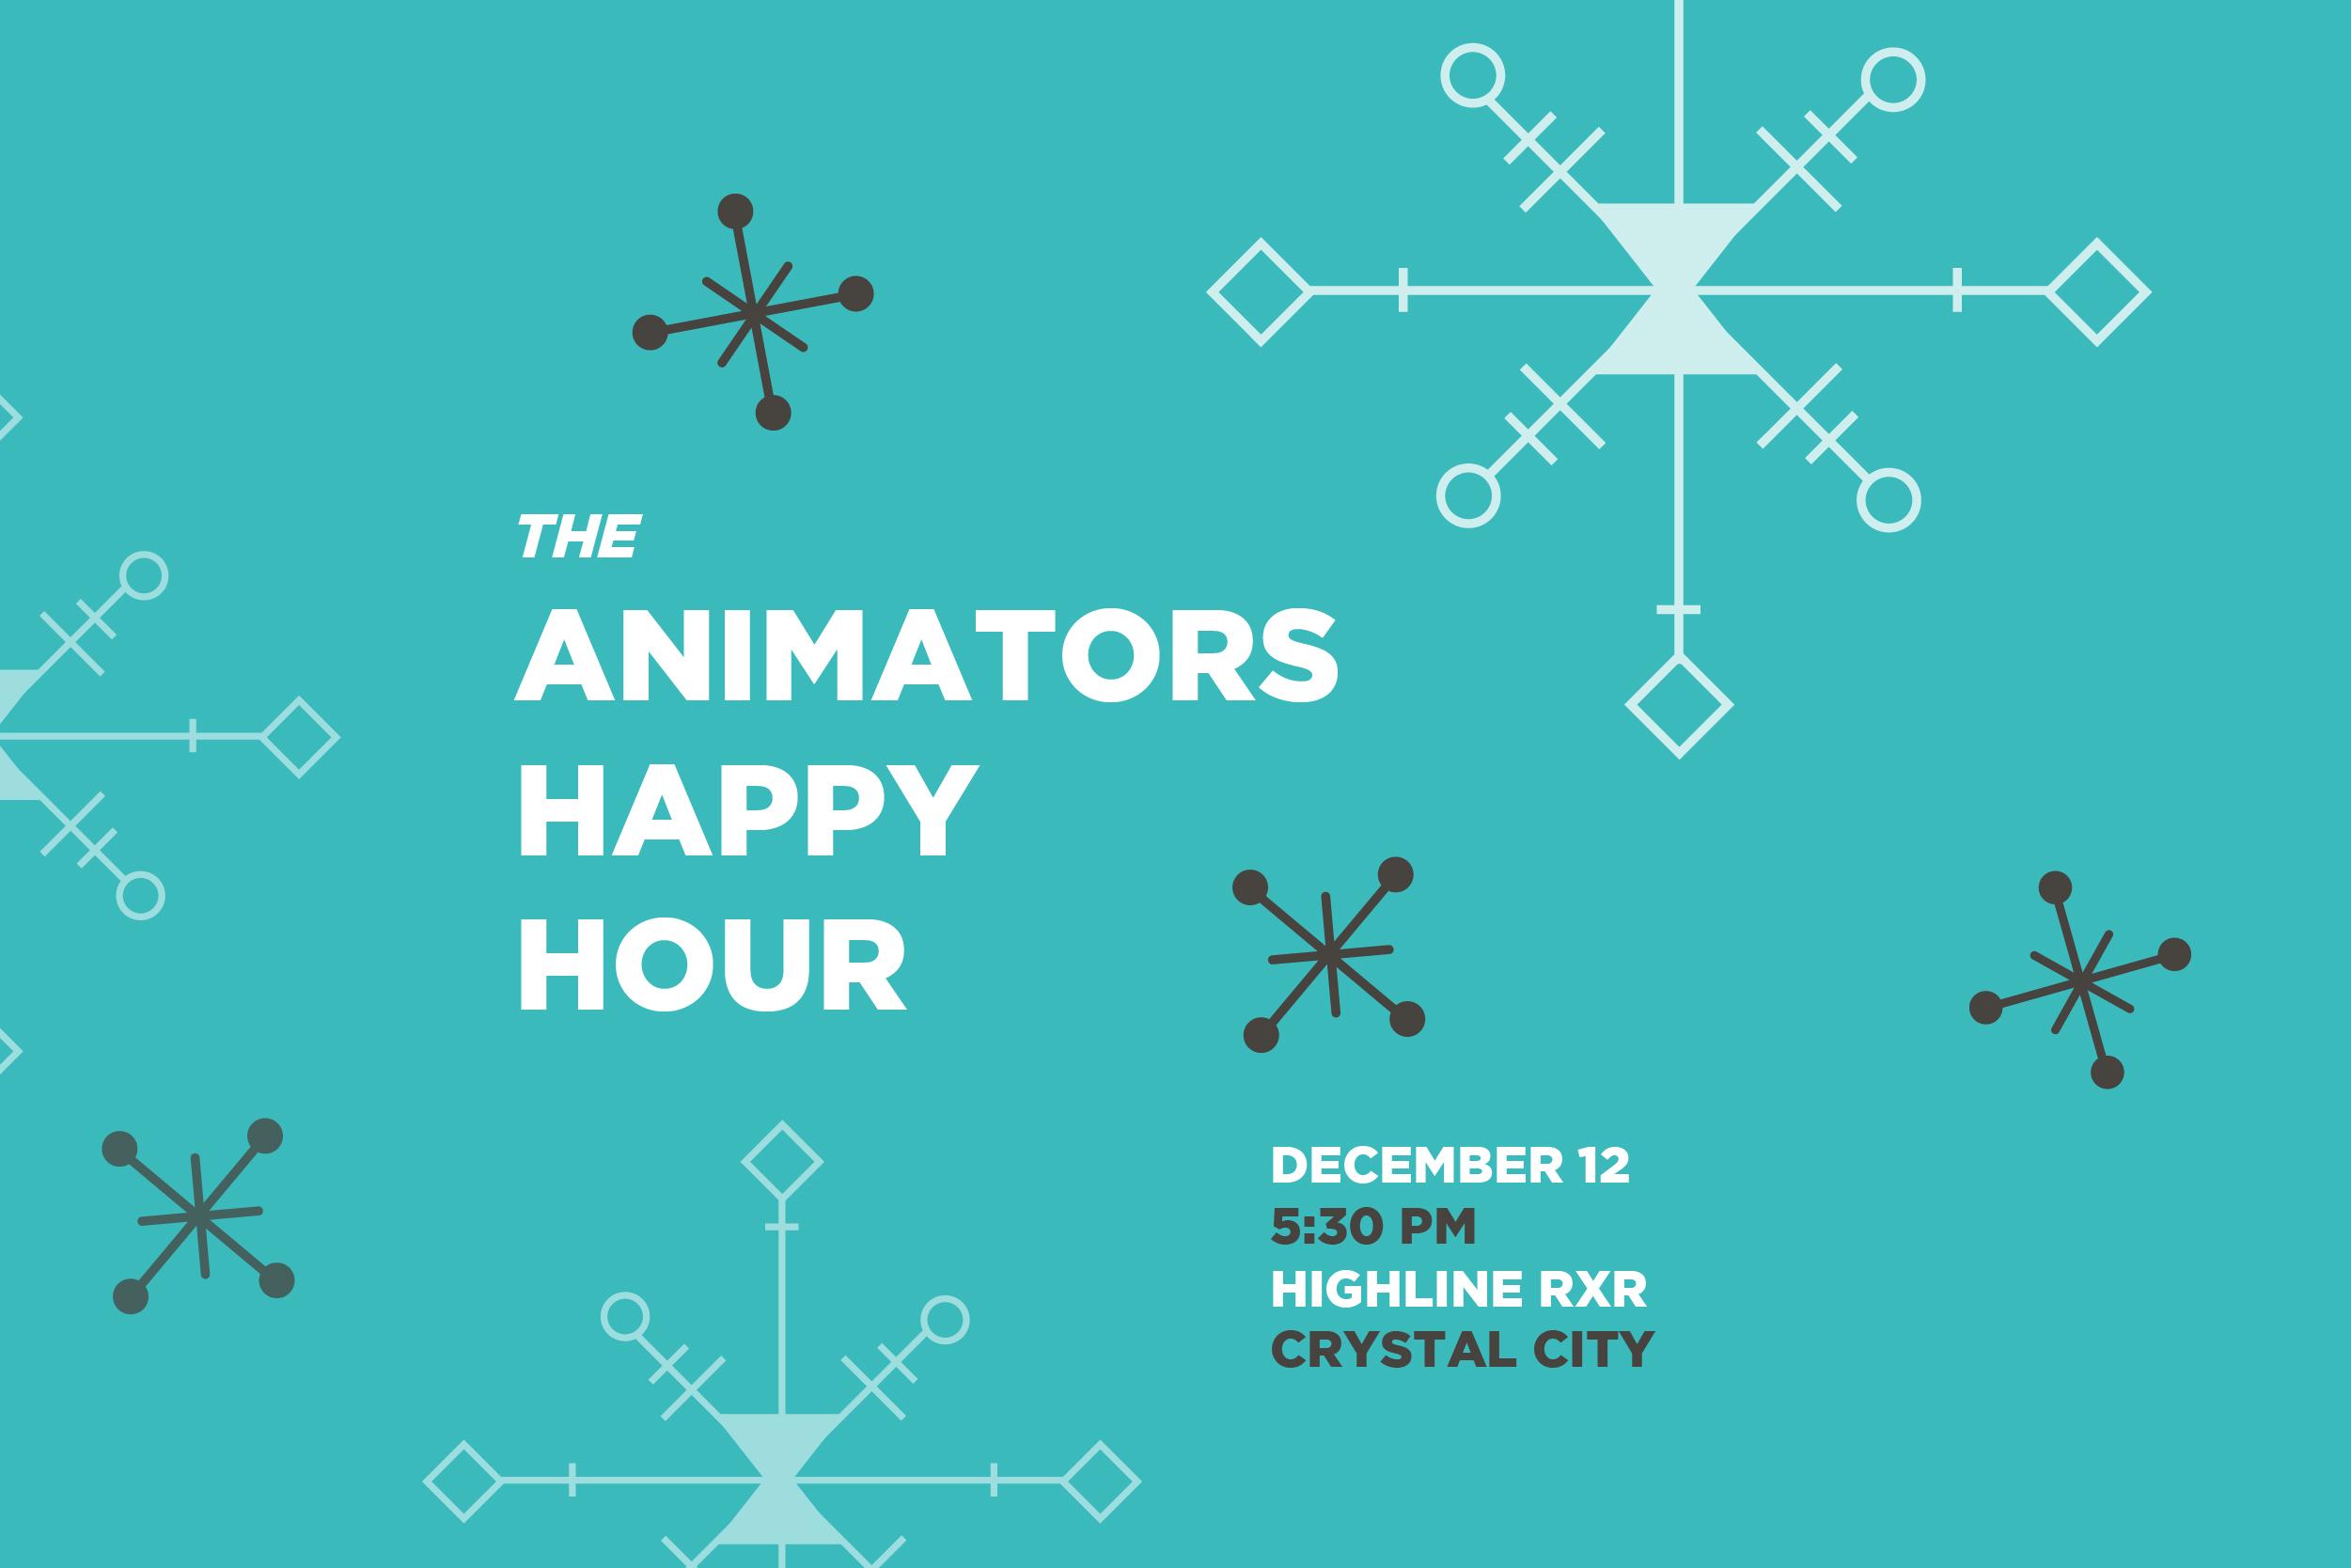 The Animation Holiday Happy Hour